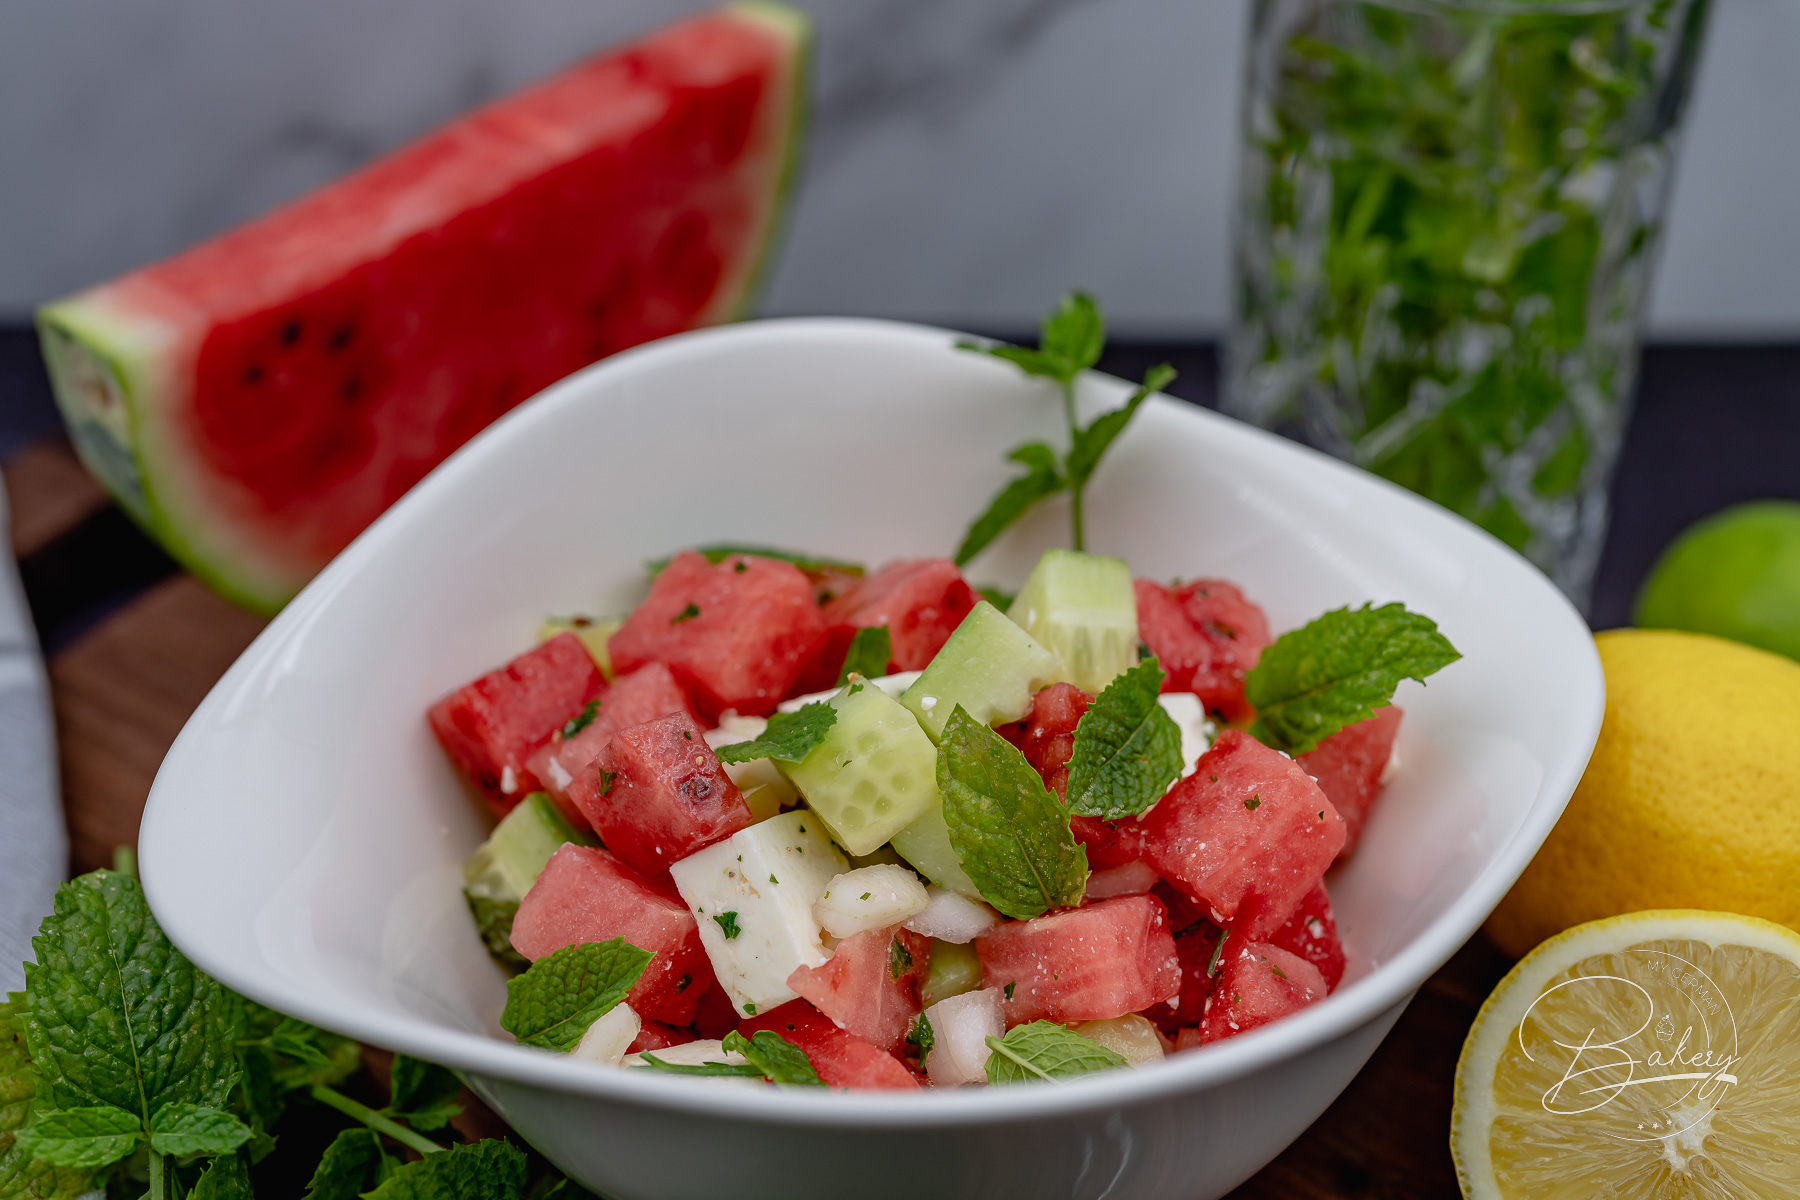 Summer salad with watermelon recipe - Light fitness salad with feta - Fitness salad - Healthy salad with watermelon, cucumber, feta and fresh mint - refreshing and simple